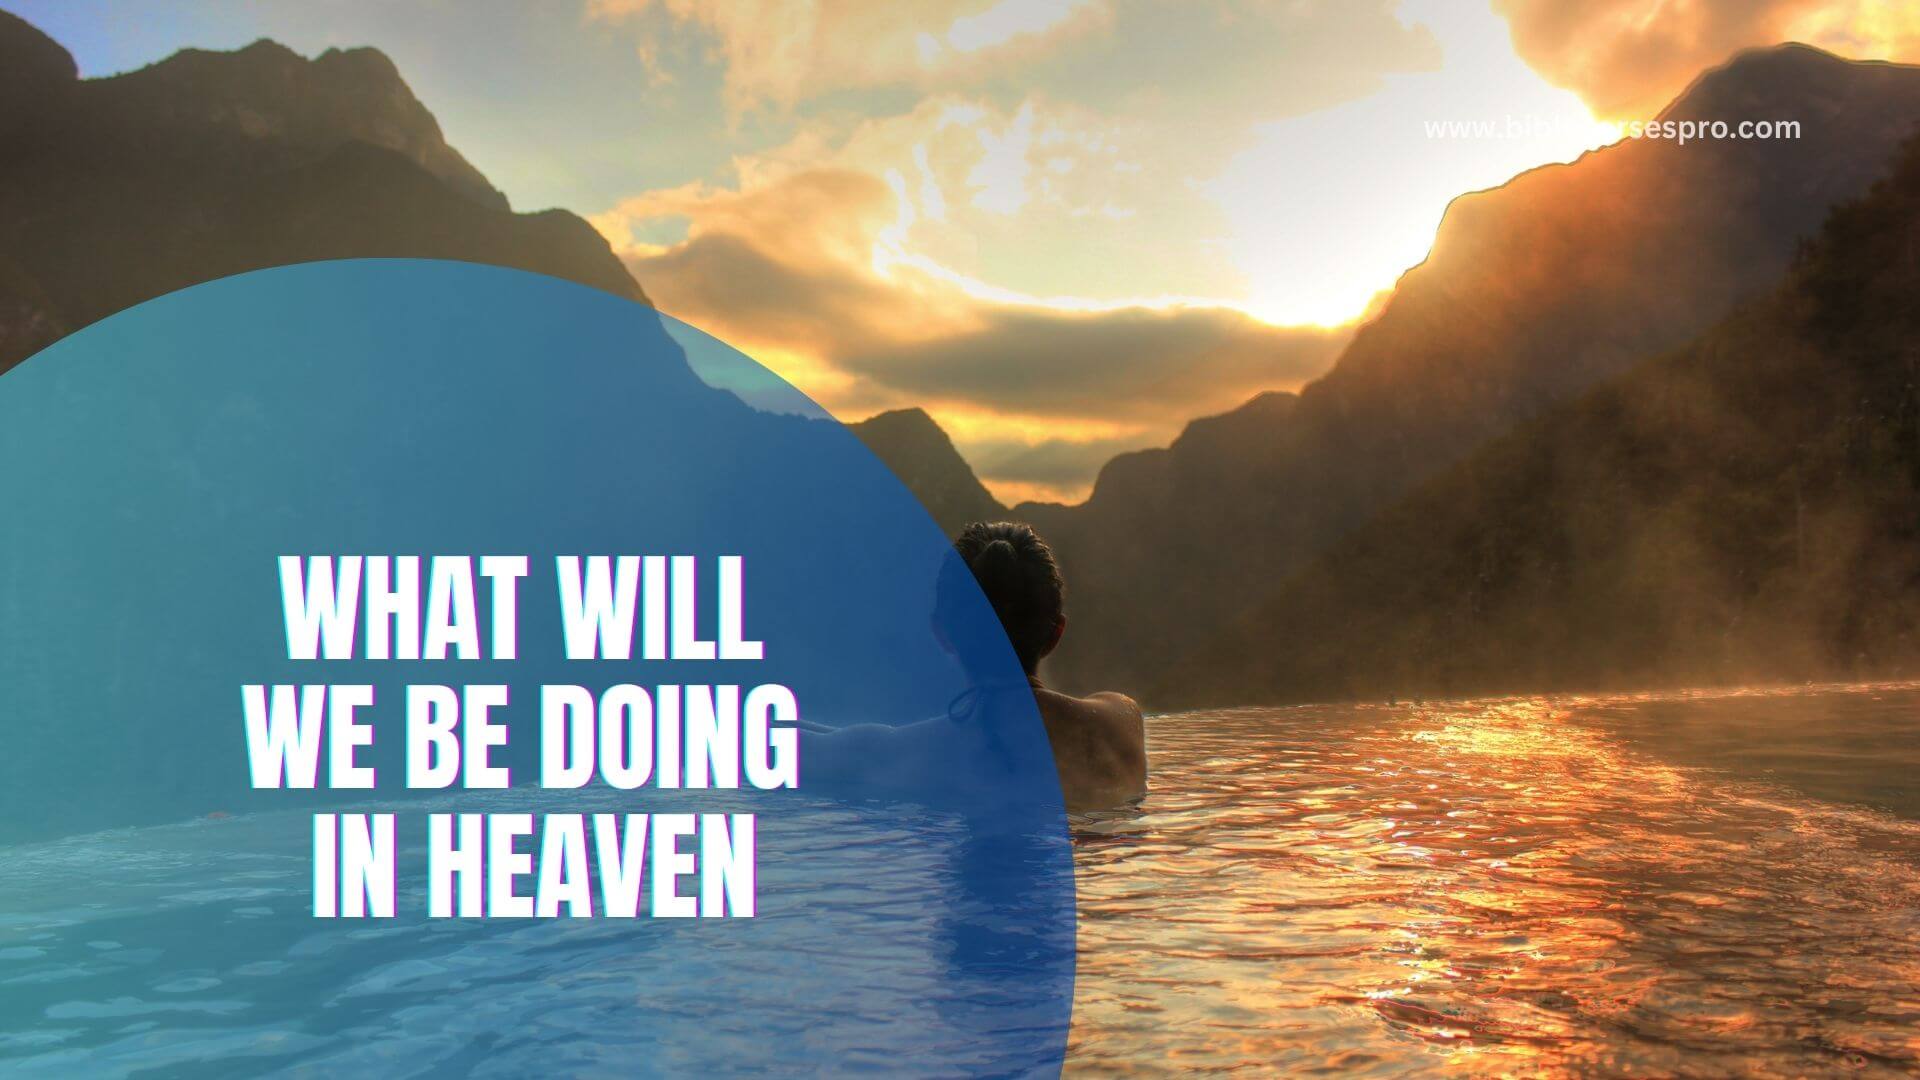 WHAT WILL WE BE DOING IN HEAVEN